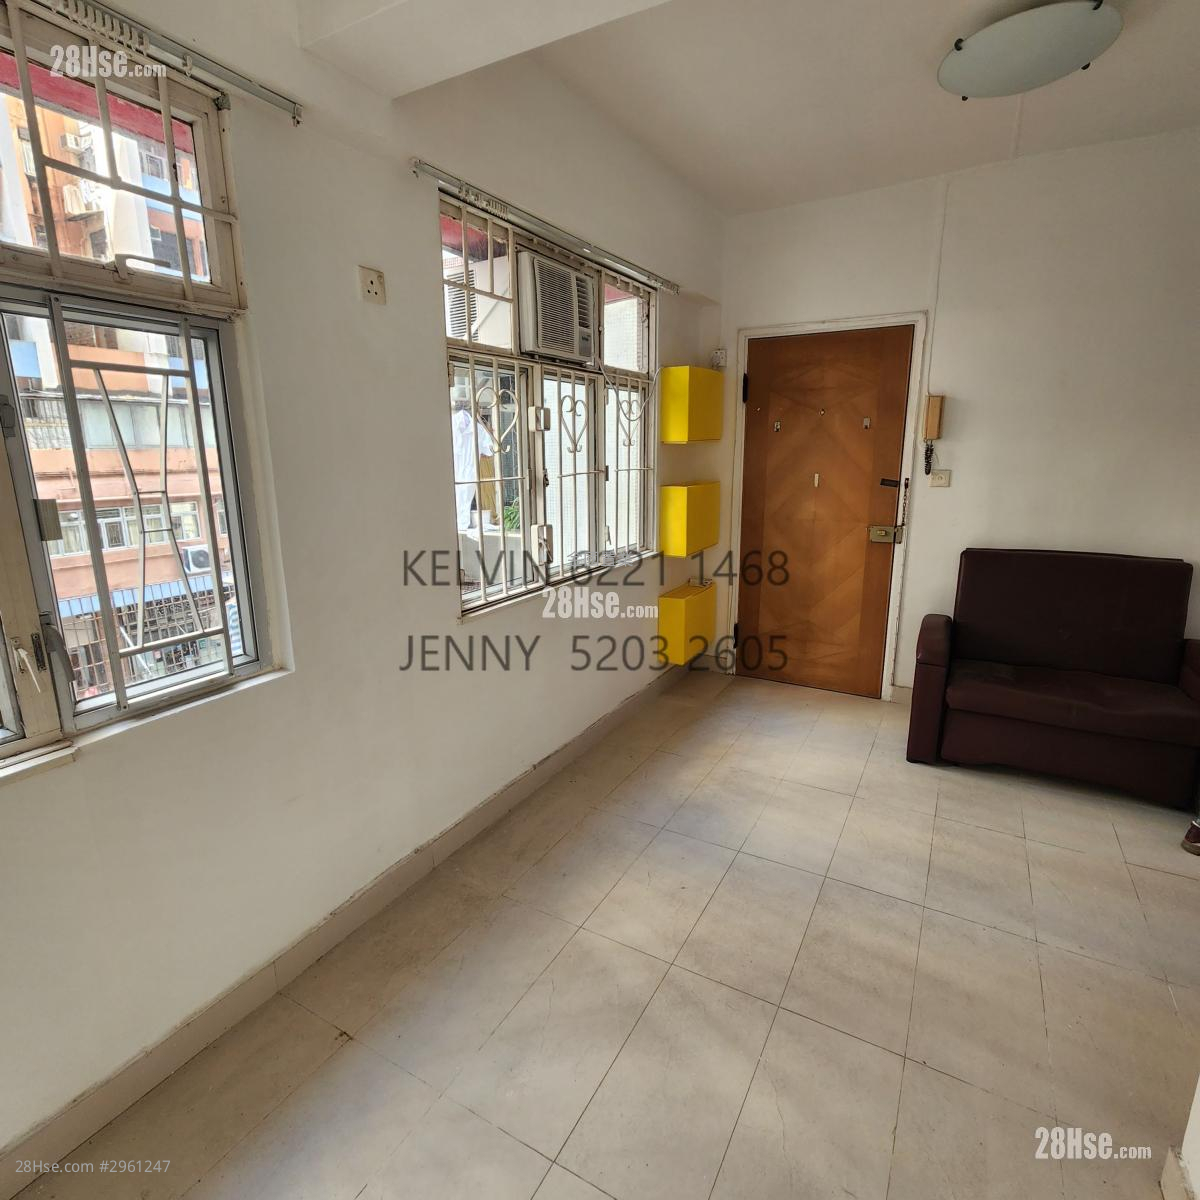 Kay Pont Building Sell 1 bedrooms , 1 bathrooms 283 ft²